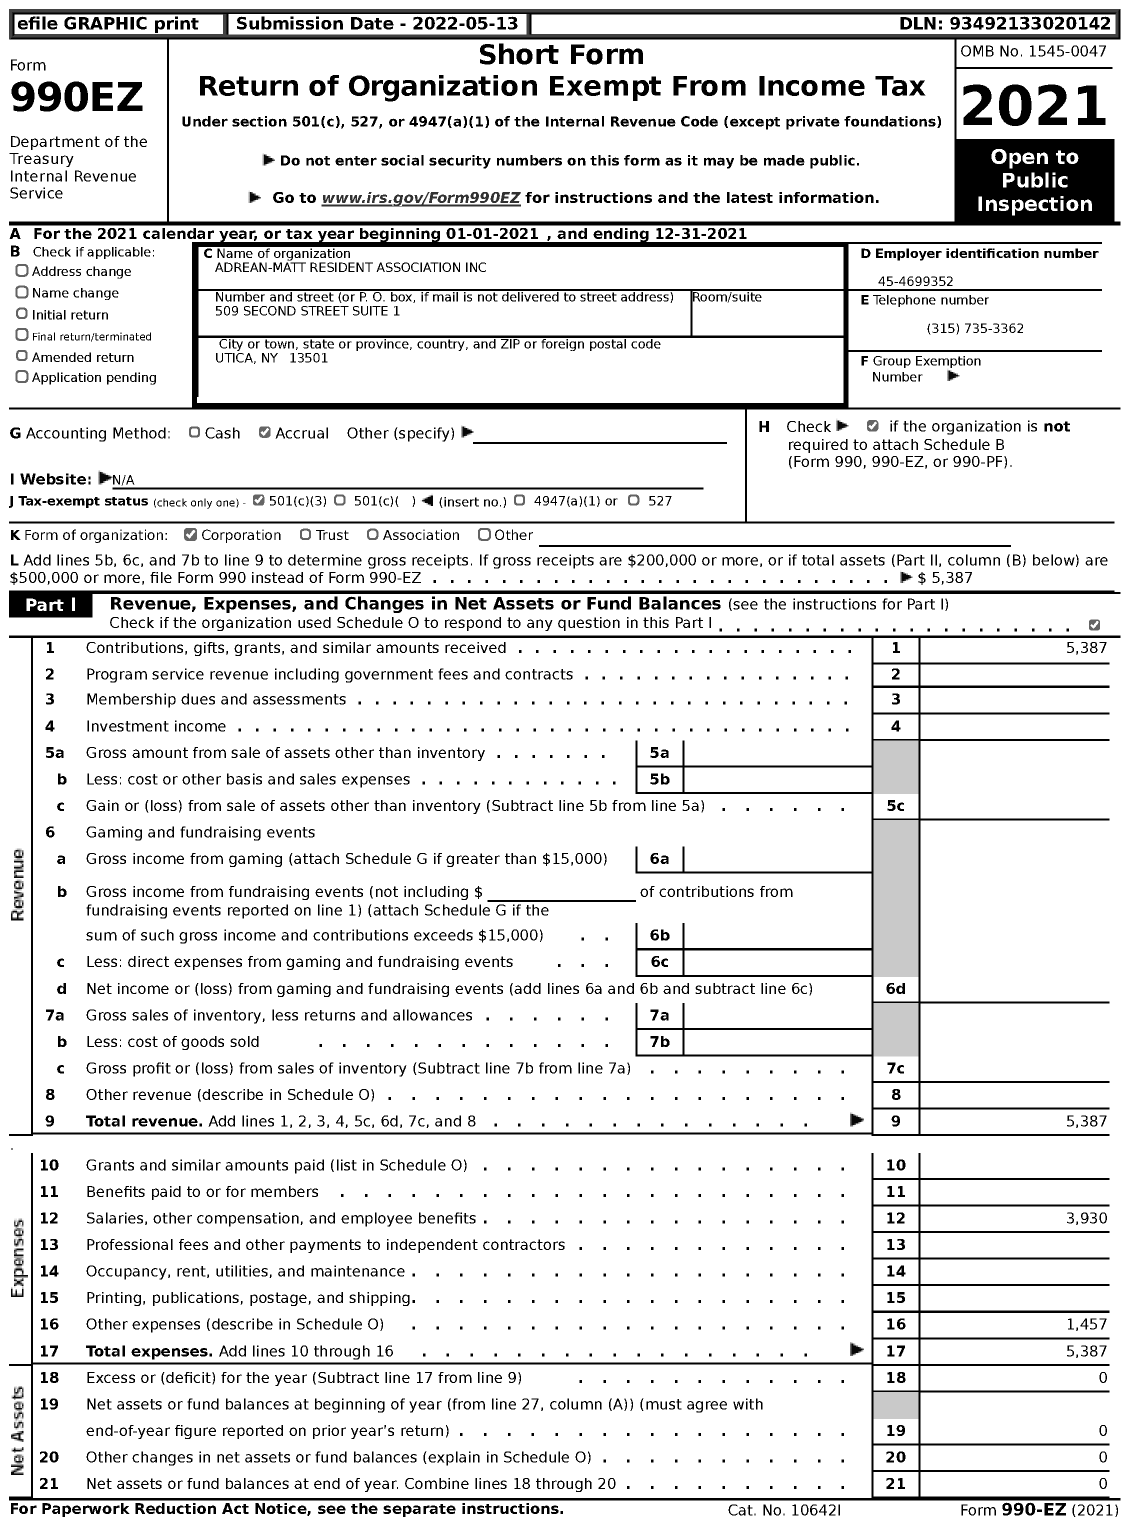 Image of first page of 2021 Form 990EZ for Adrean-Matt Resident Association